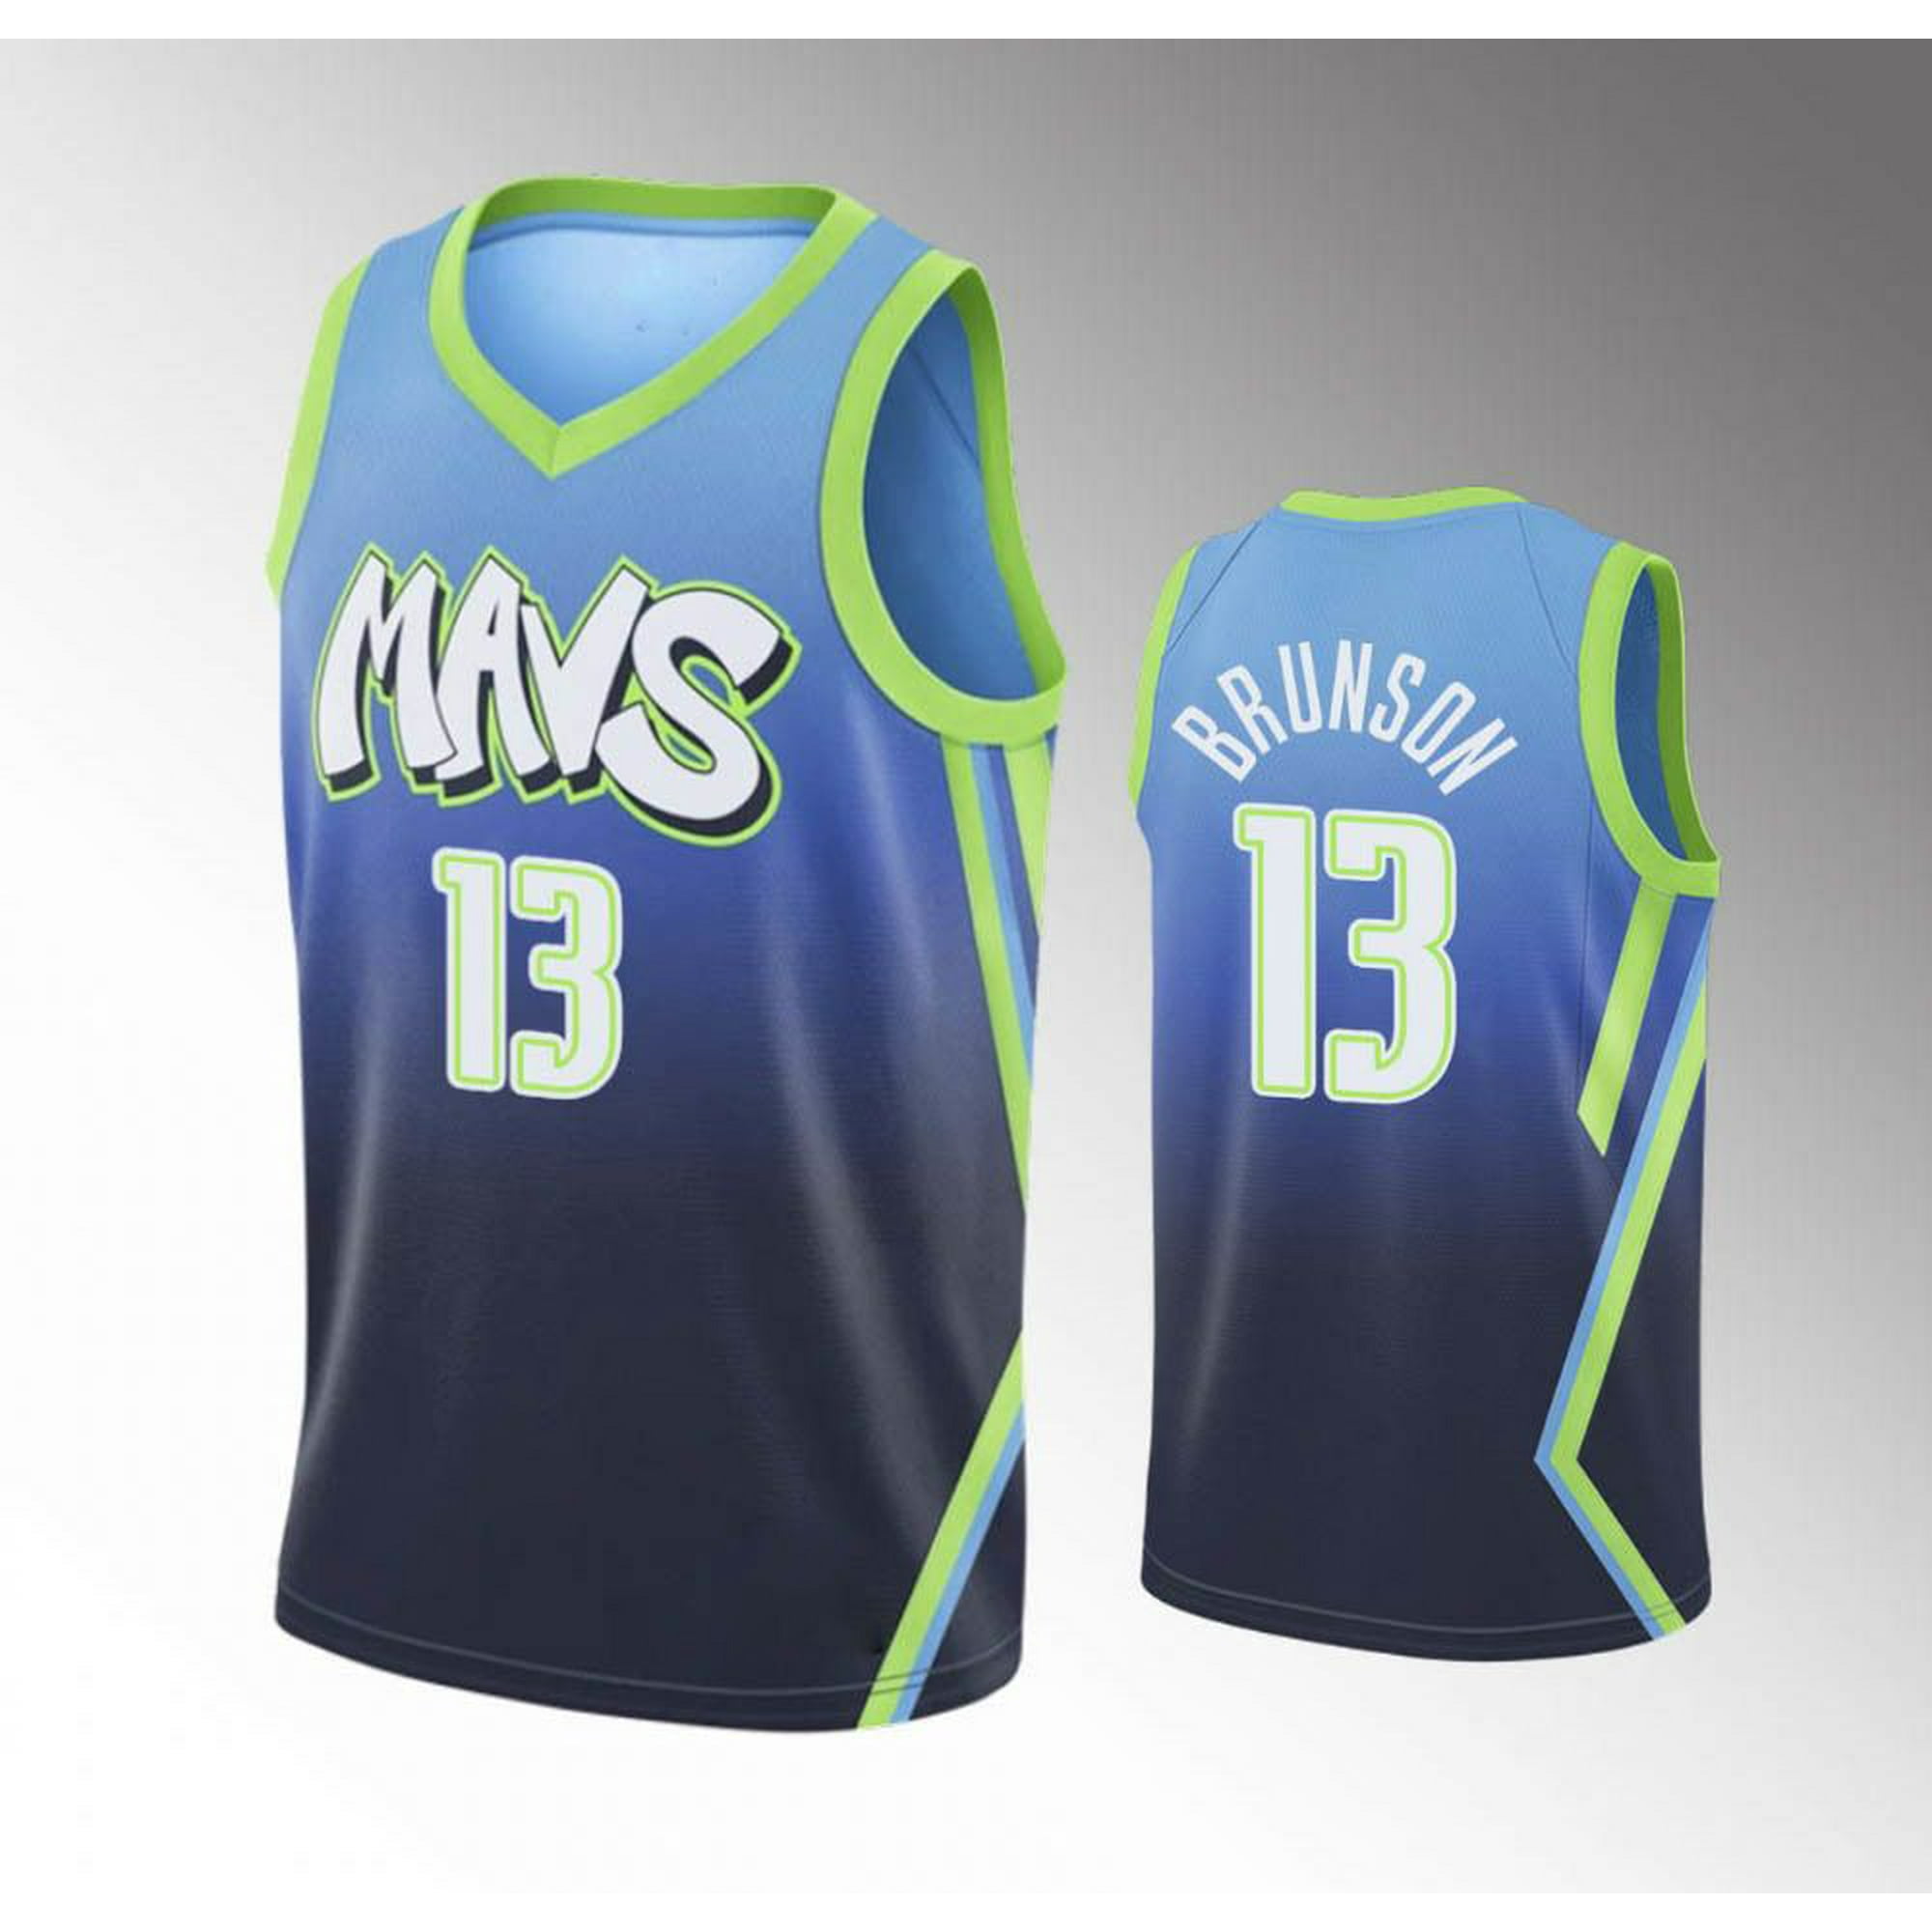 Dallas Mavs New Jerseys Should Be Sent Back Where They Came From